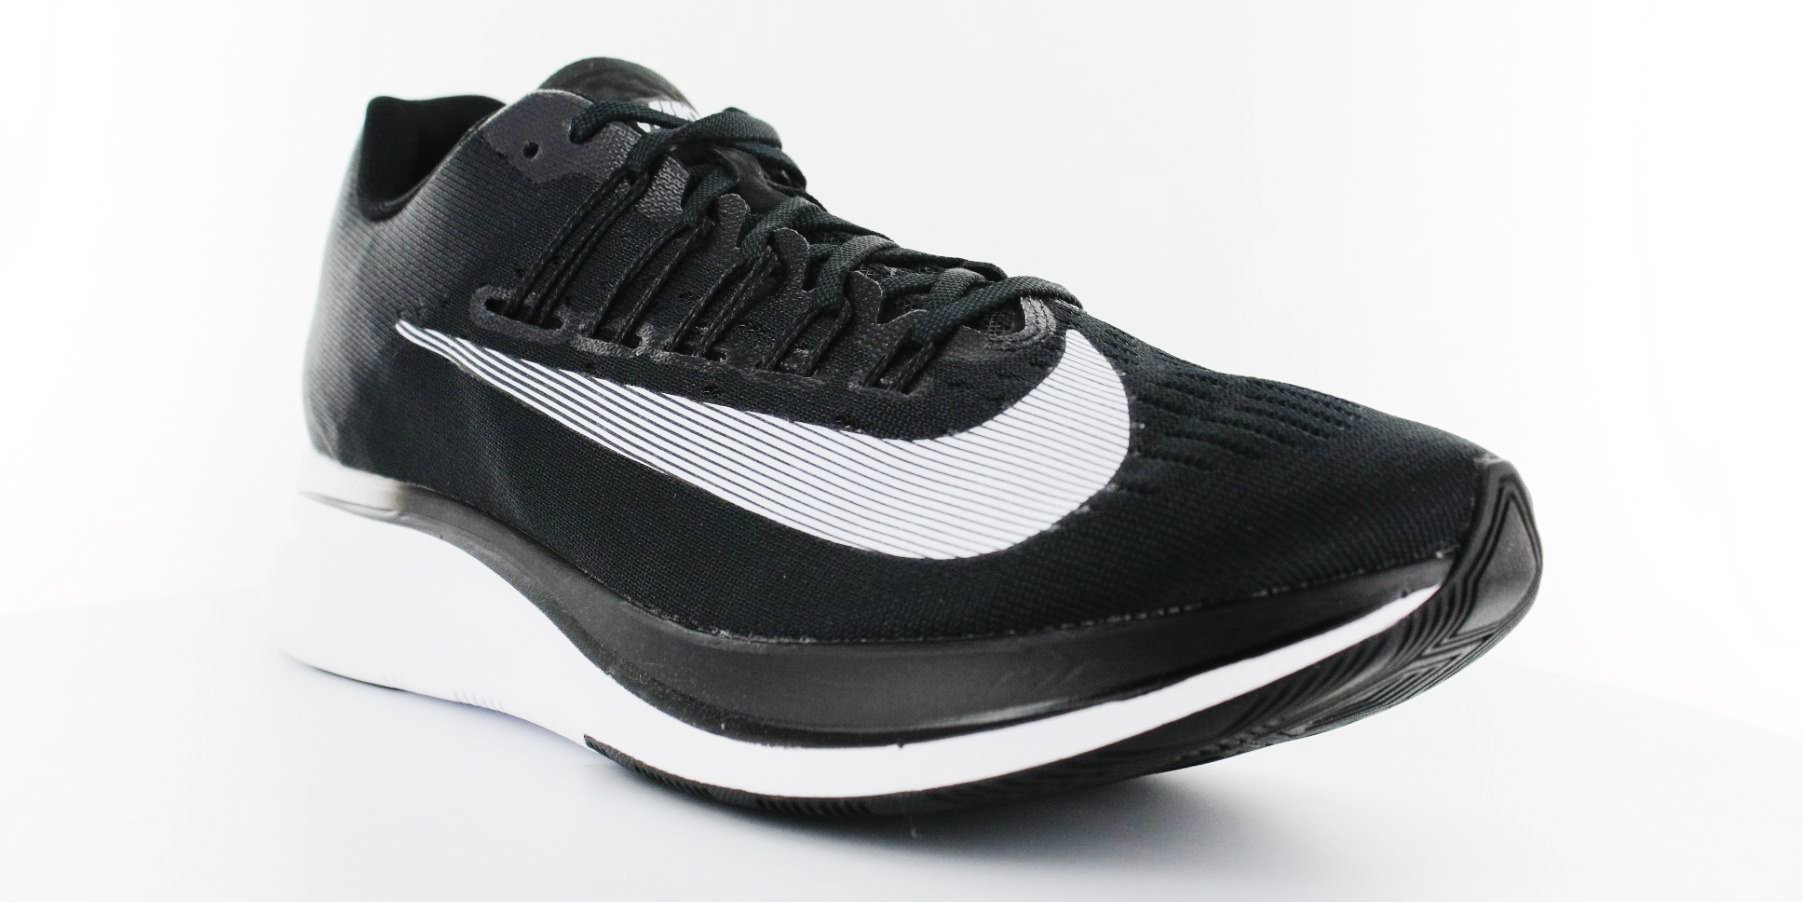 Nike Zoom Fly Review: Fit, Feel & Function